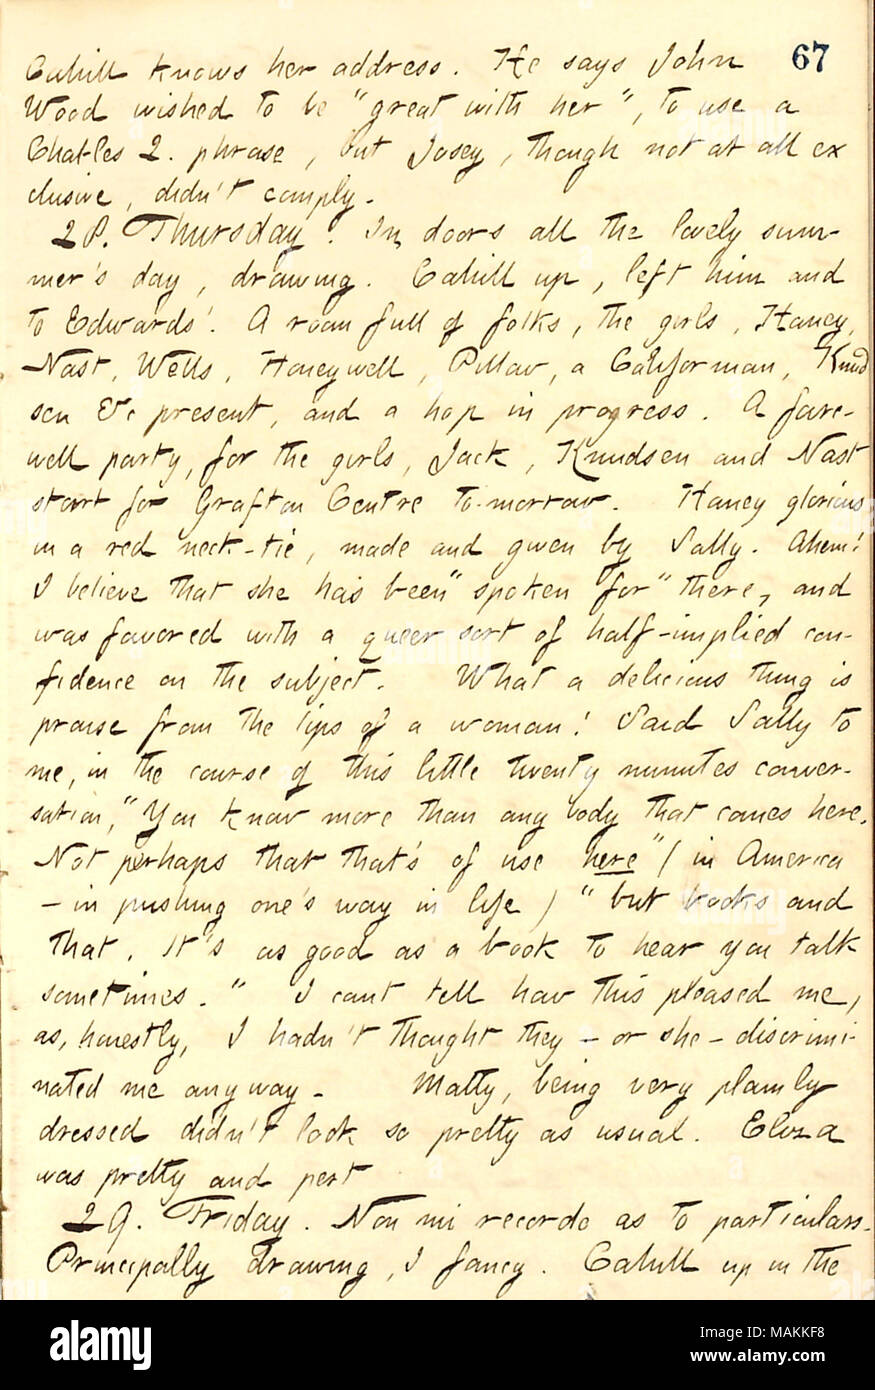 Describes a visit to the Edwards family.  Transcription: [Frank] Cahill knows her [Josey Winship's] address. He says John Wood wished to be 'great with her,' to use a Charles 2. phrase, but Josey, though not at all exclusive, didn't comply. 28. Thursday. In doors all the lovely summer's day, drawing. [Frank] Cahill up, left him and to Edwards'. A room full of folks, the girls [Sally, Matty, and Eliza Edwards], [Jesse] Haney, [Thomas] Nast, [Edward] Wells, [Charles] Honeywell, Pillow, a Californian, [Carl] Knudsen &c present and a hop in progress. A farewell party for the girls, Jack, Knudsen a Stock Photo